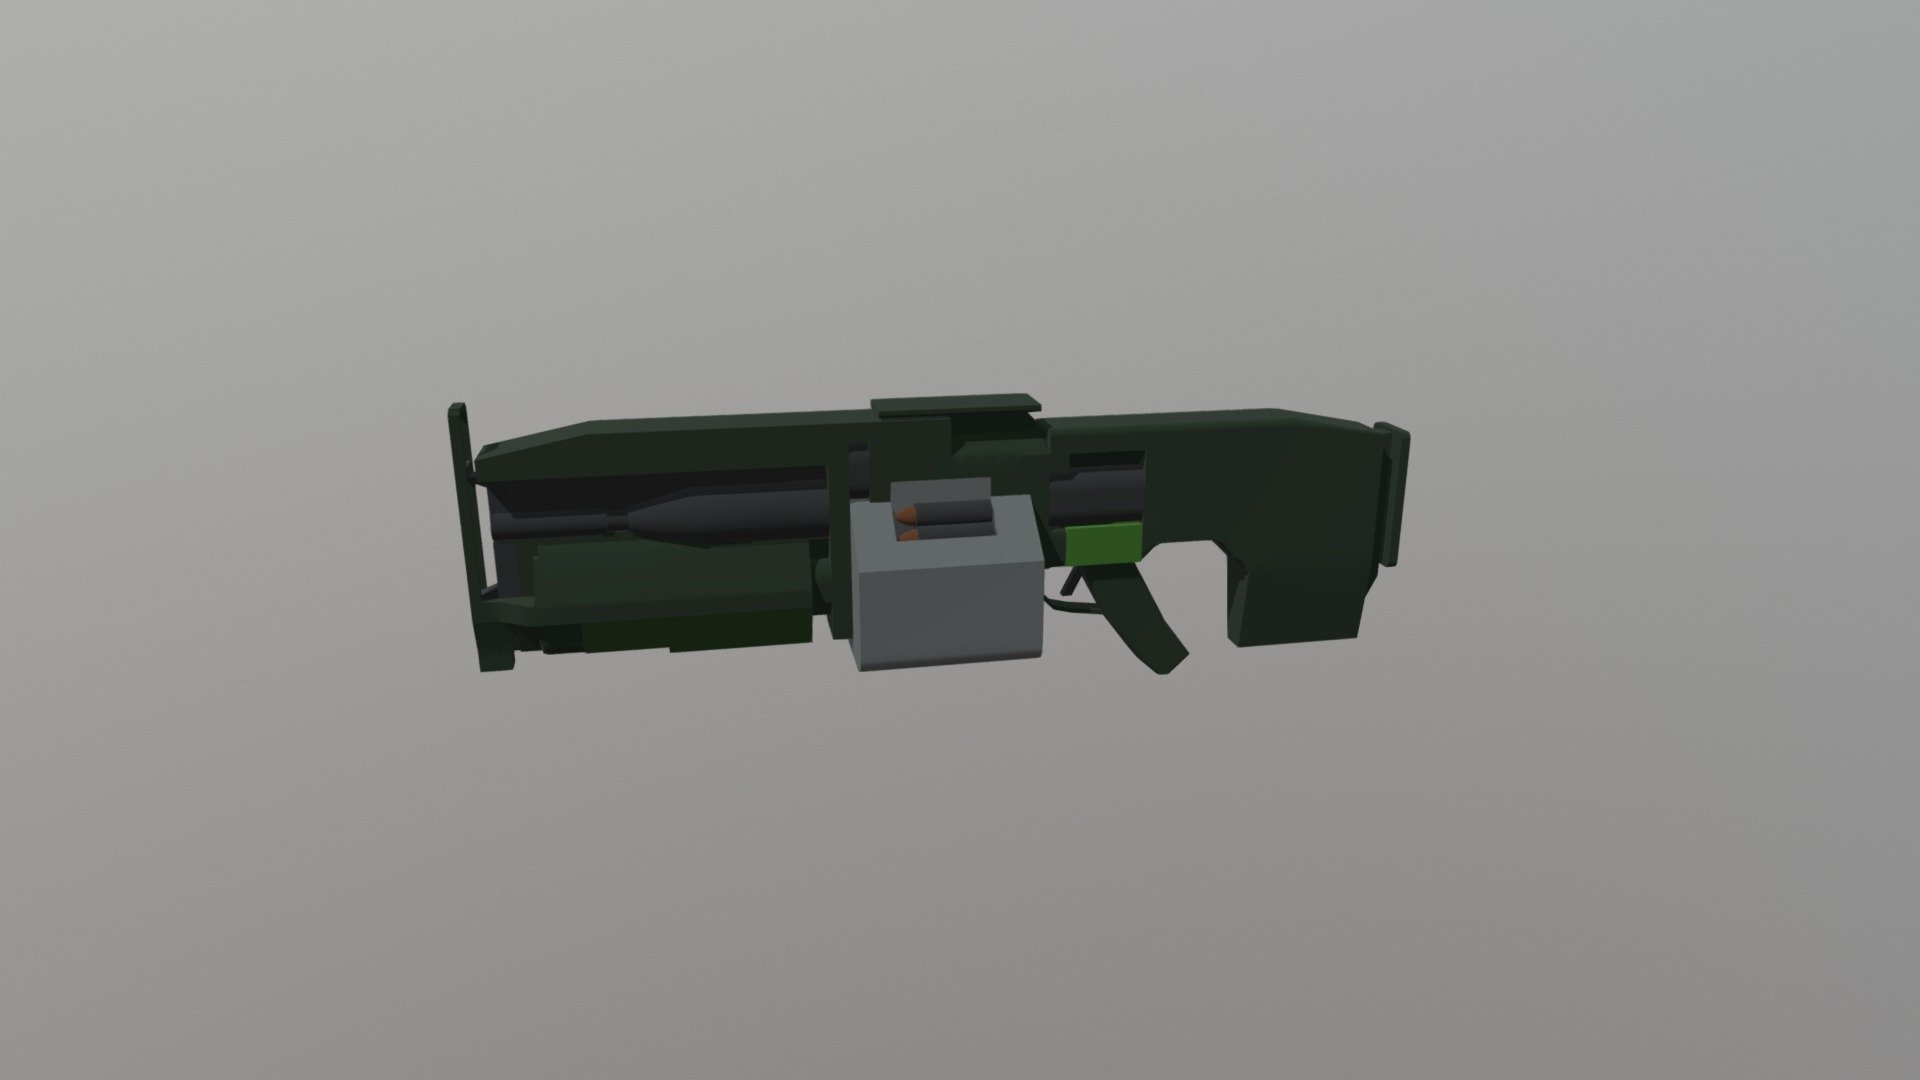 Heavy Assault Rifle for Ravenfield